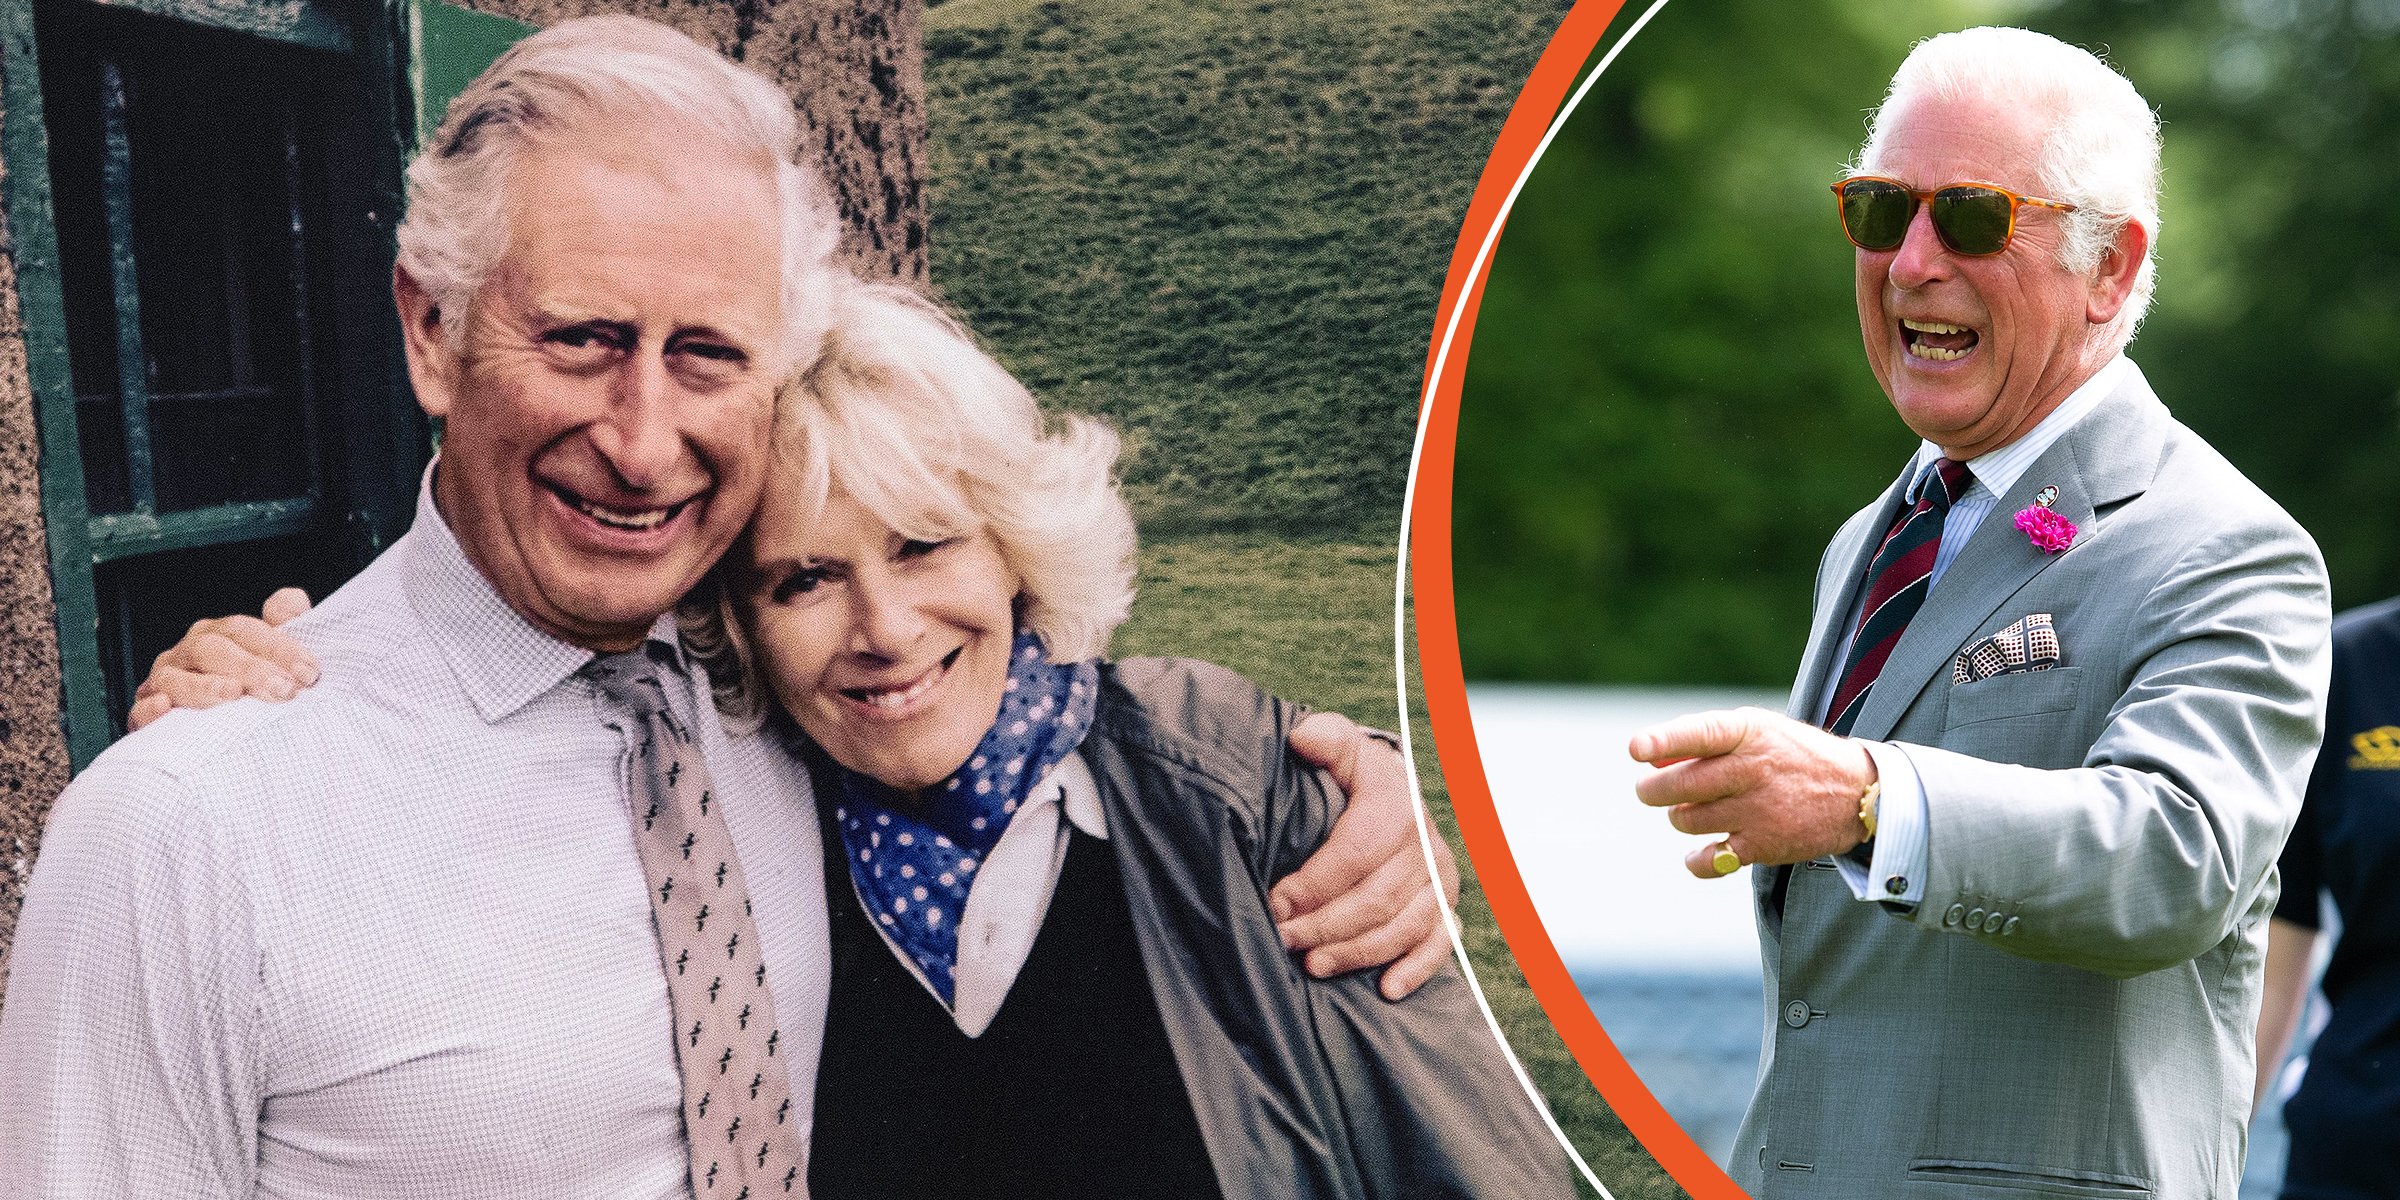 Prince Charles and Duchess Camilla, 2015 | Prince Charles, 2021 | Source: Getty Images